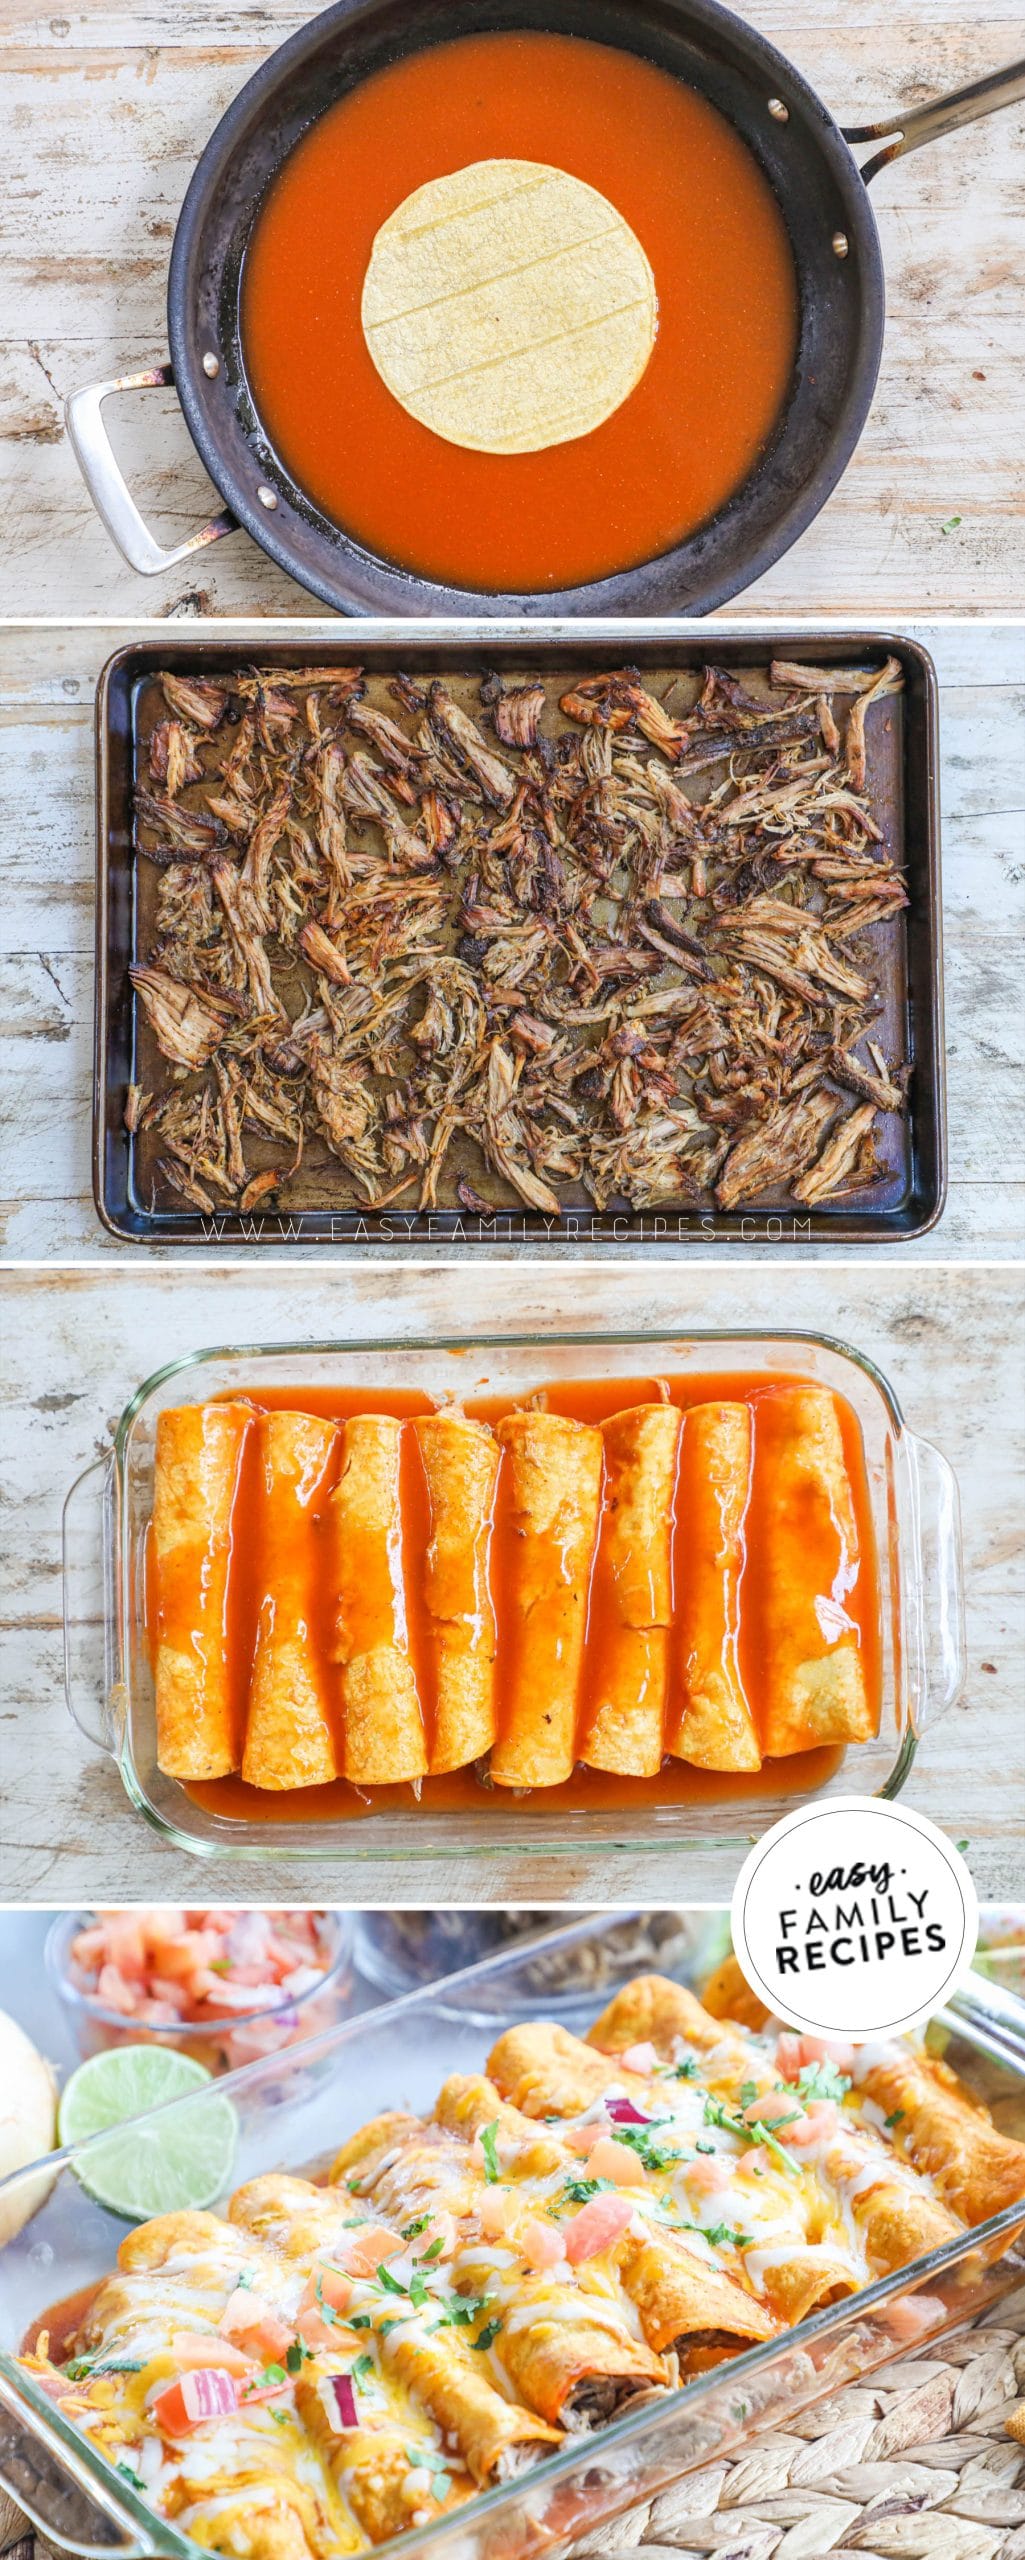 4 image collage with steps on how to prepare recipe: 1. fry pan with enchilada sauce warming corn tortilla, 2. shredded pork carnitas, 3. baking dish with filling and sauce over corn tortilla enchiladas, 4. close up of baked dish.